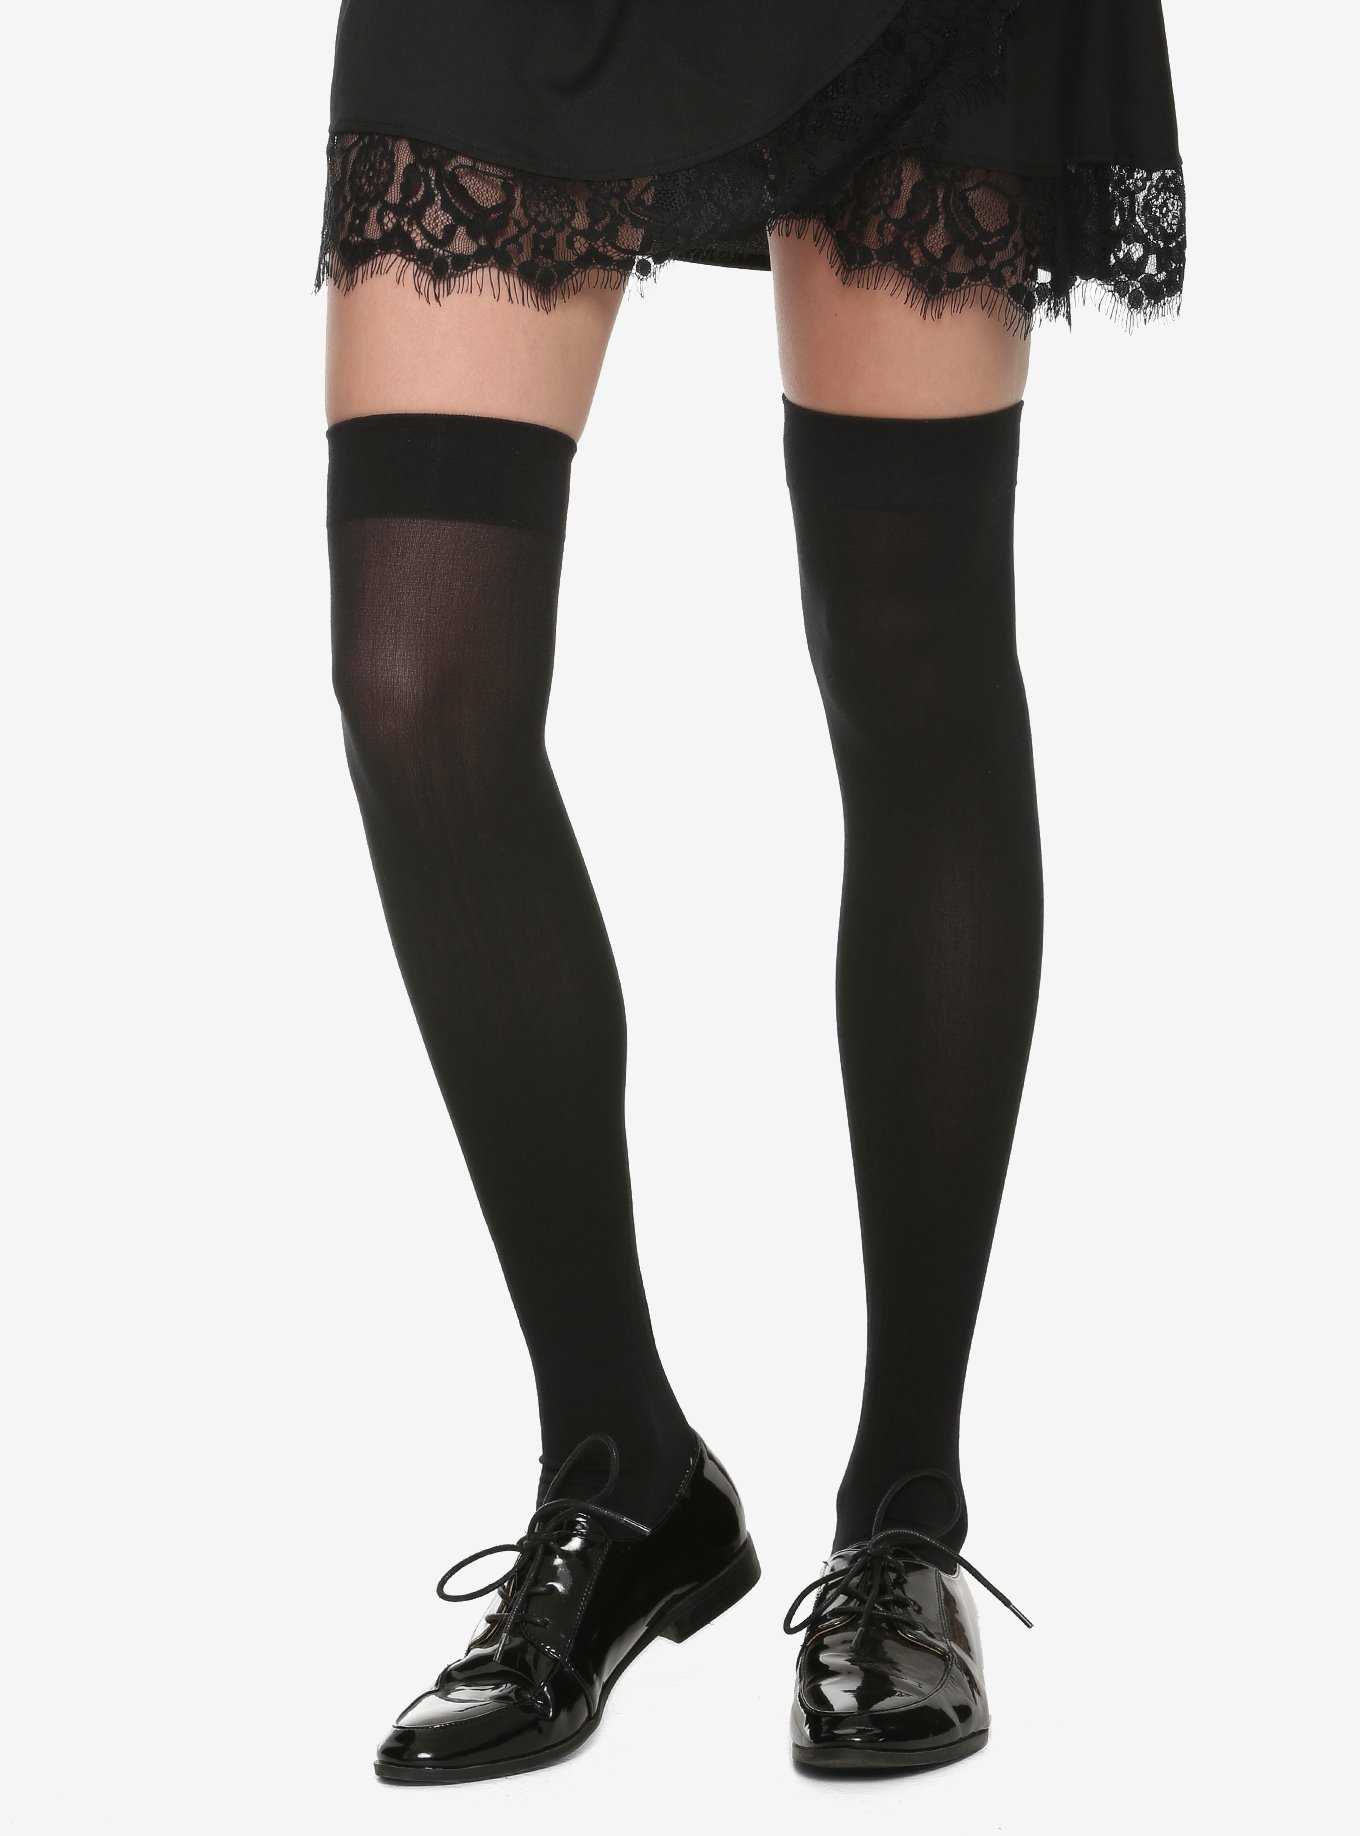 Black Floral Lace Thigh Highs, Hot Topic